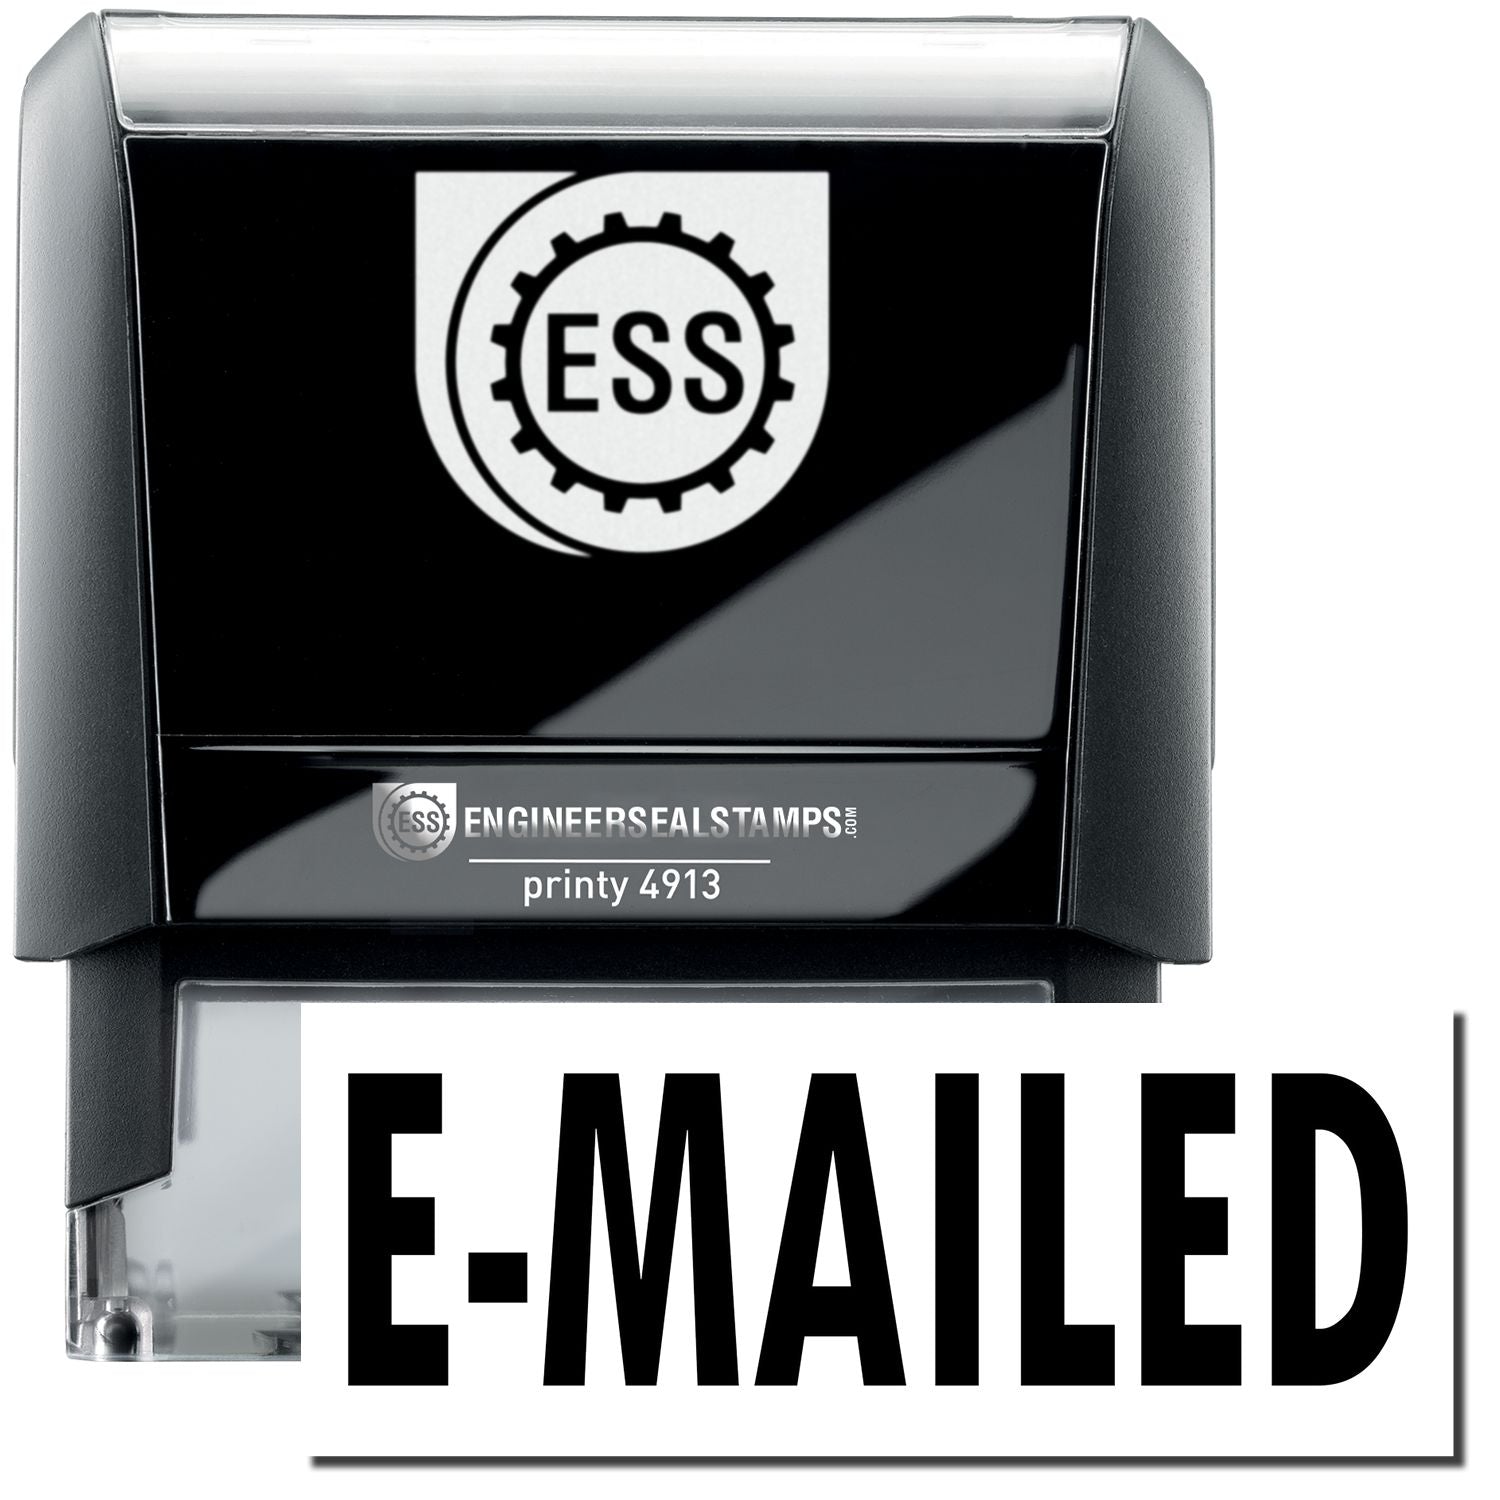 A self-inking stamp with a stamped image showing how the text "E-MAILED" in a large bold font is displayed by it.